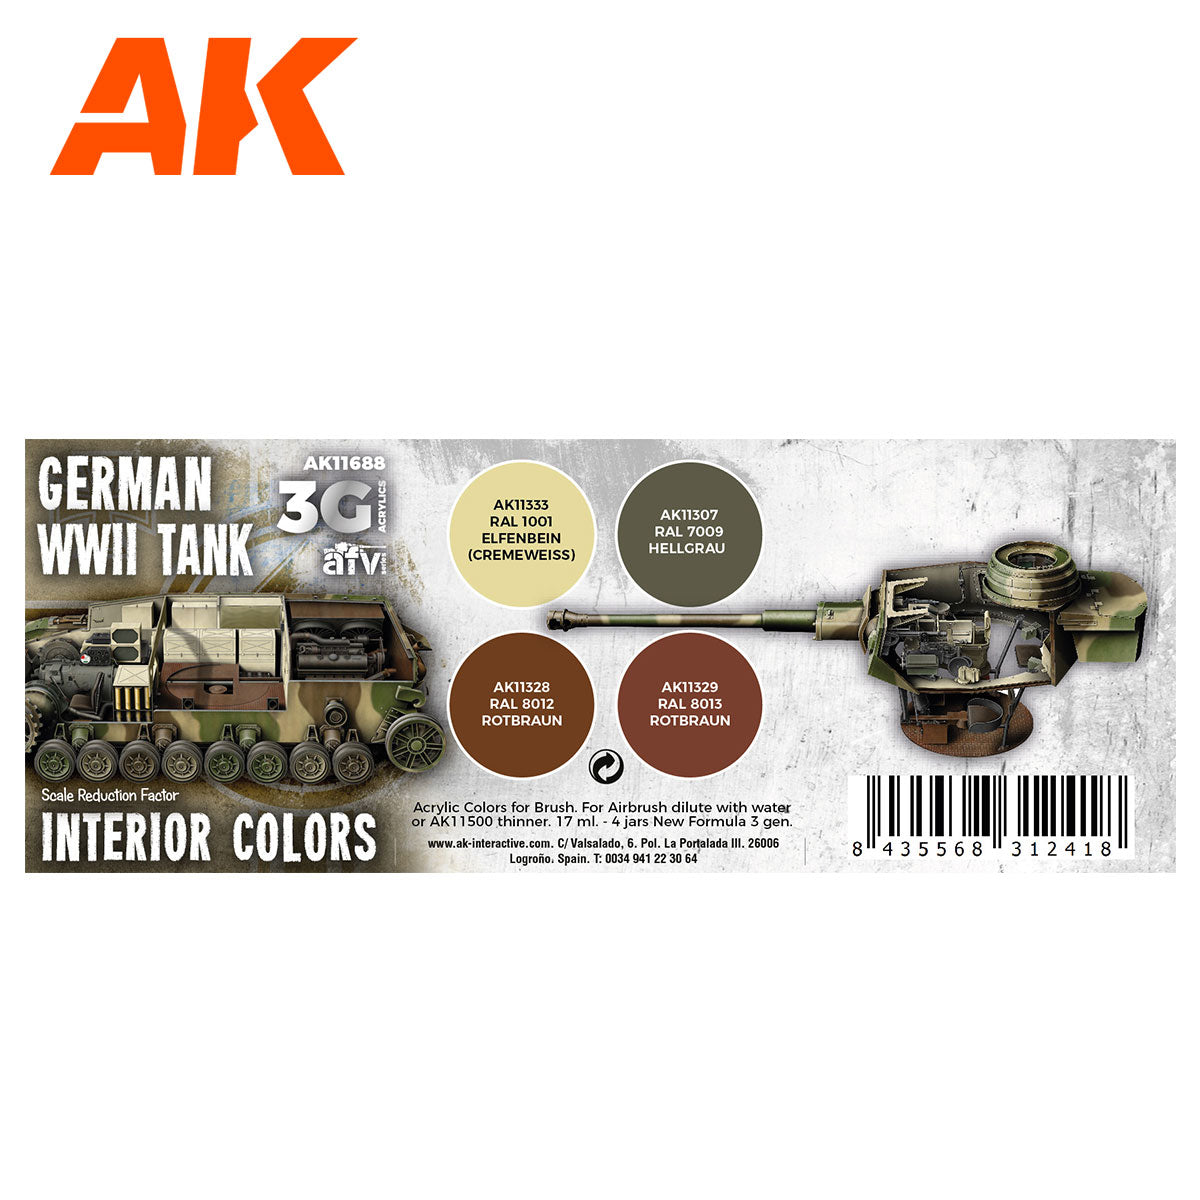 German WWII Tank Interior Colors 3G